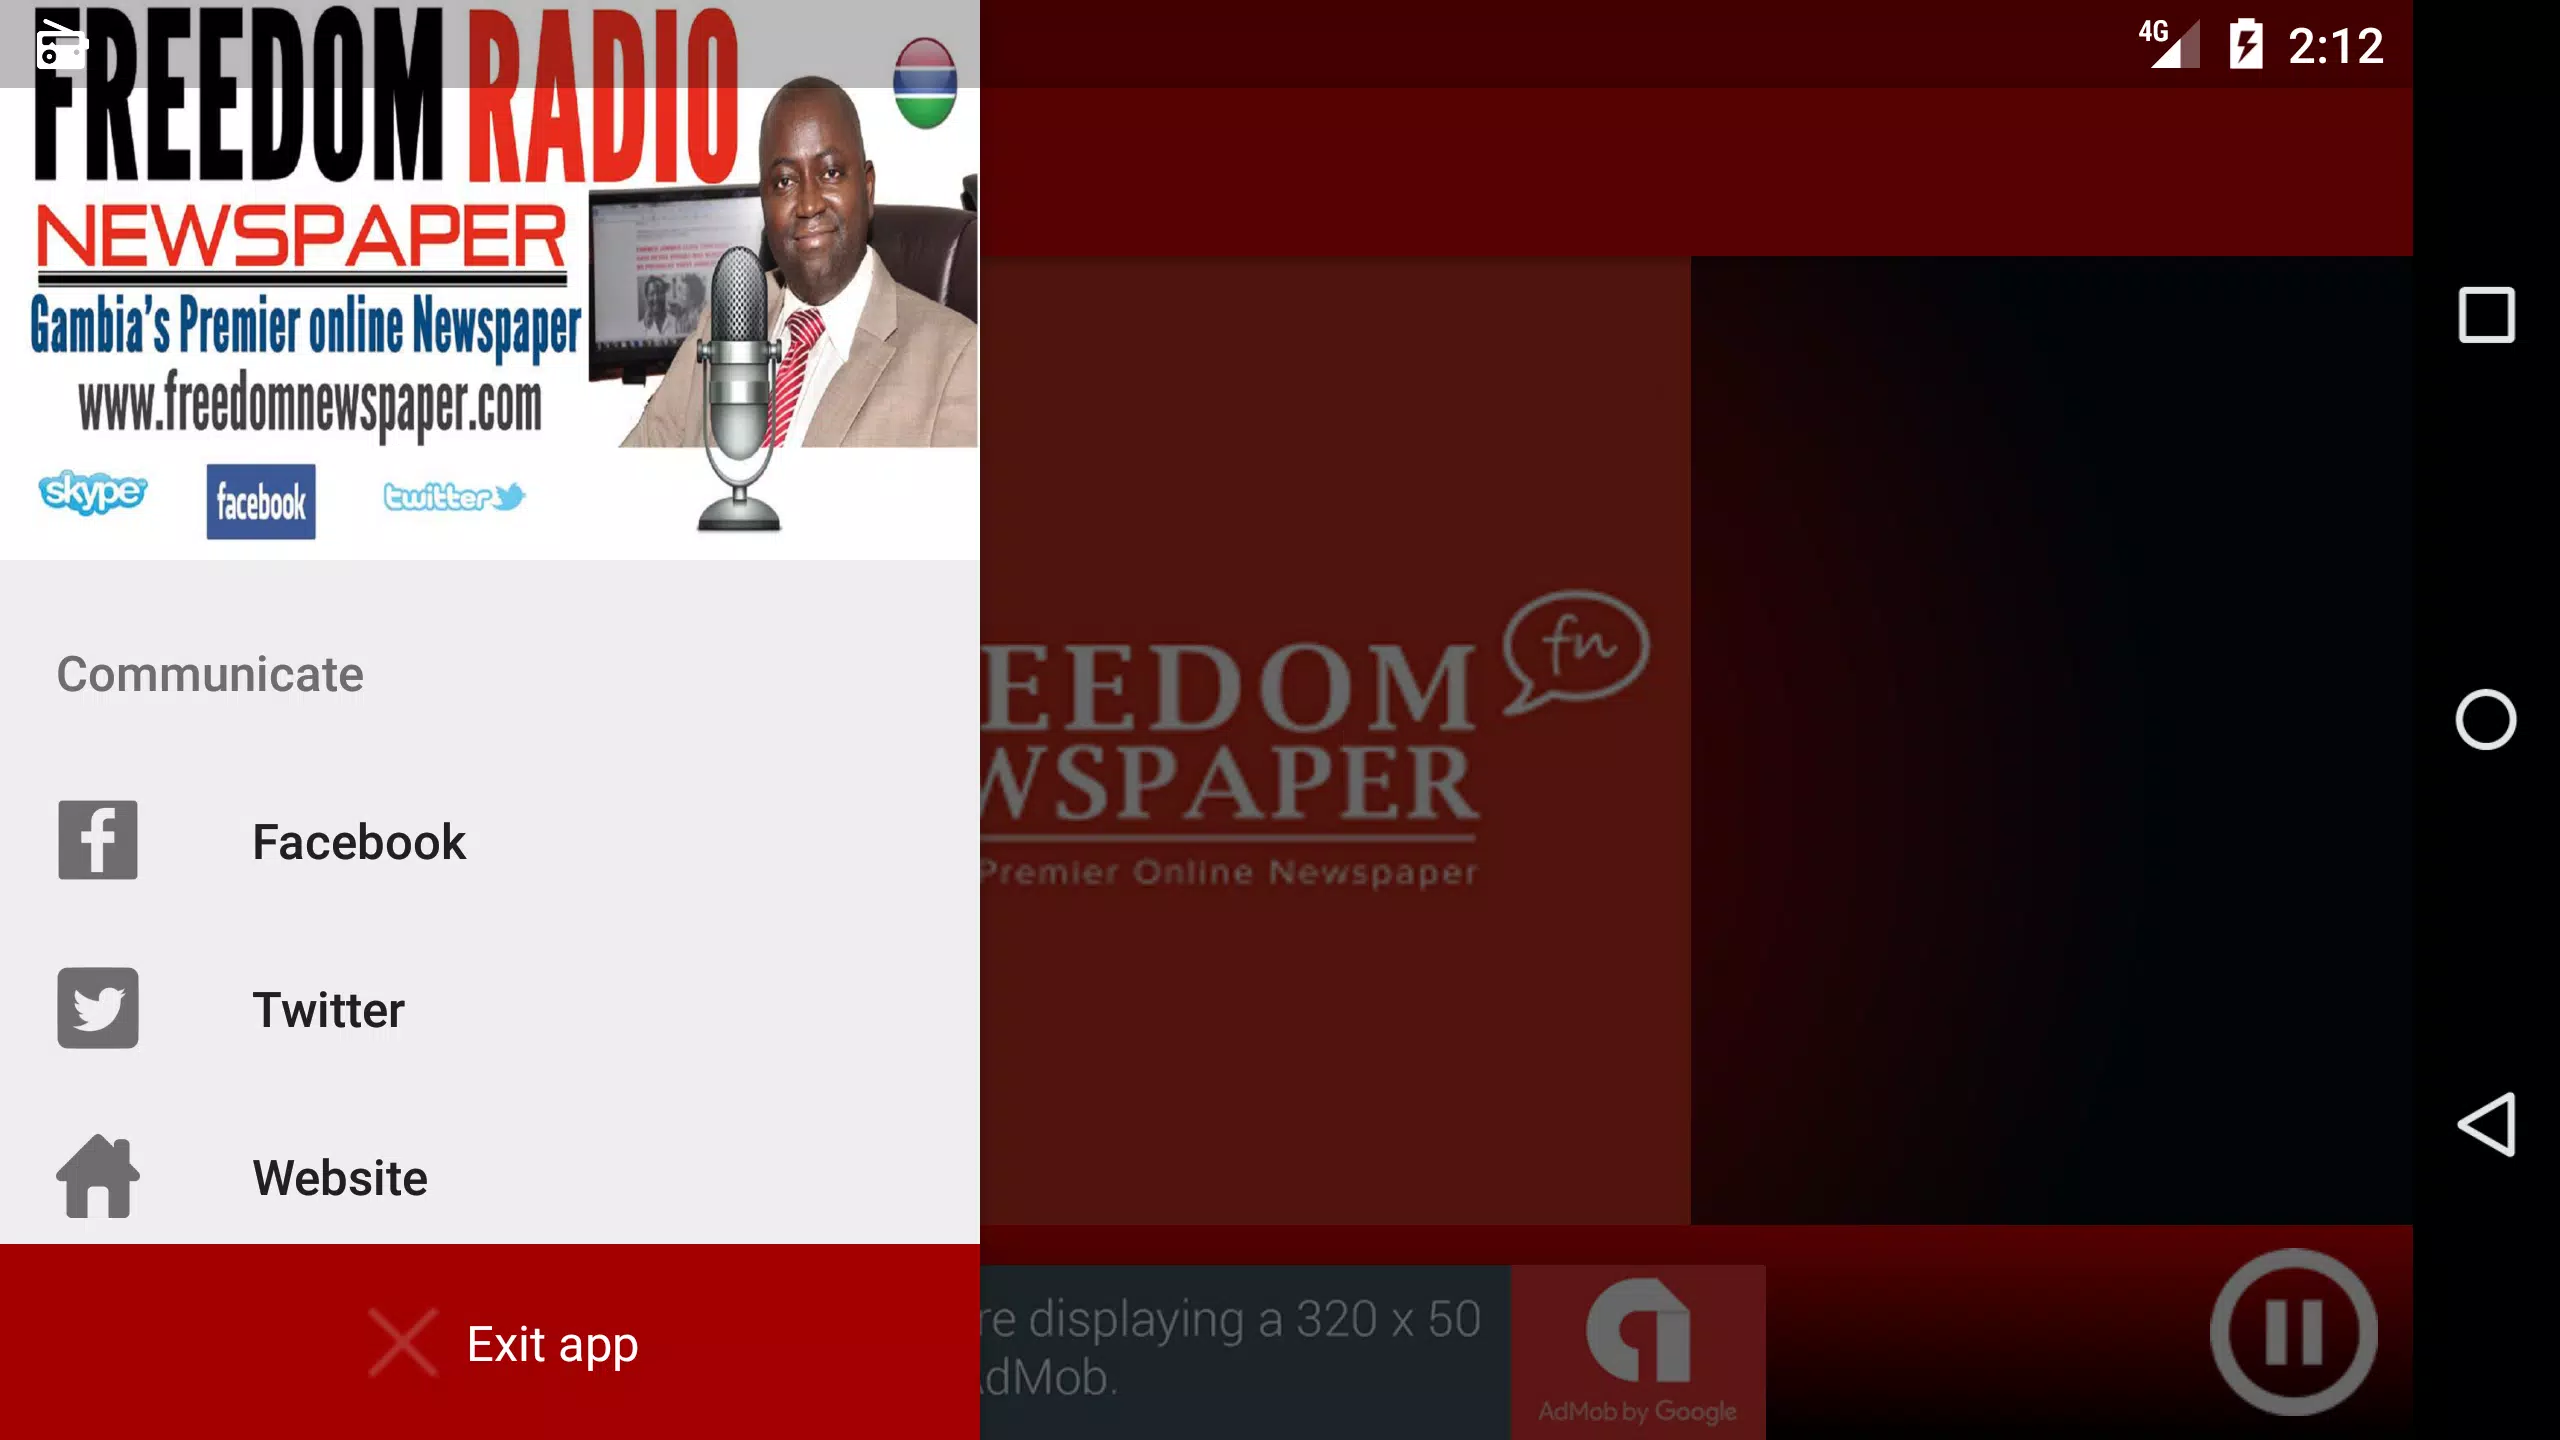 Freedom Radio Gambia APK for Android Download